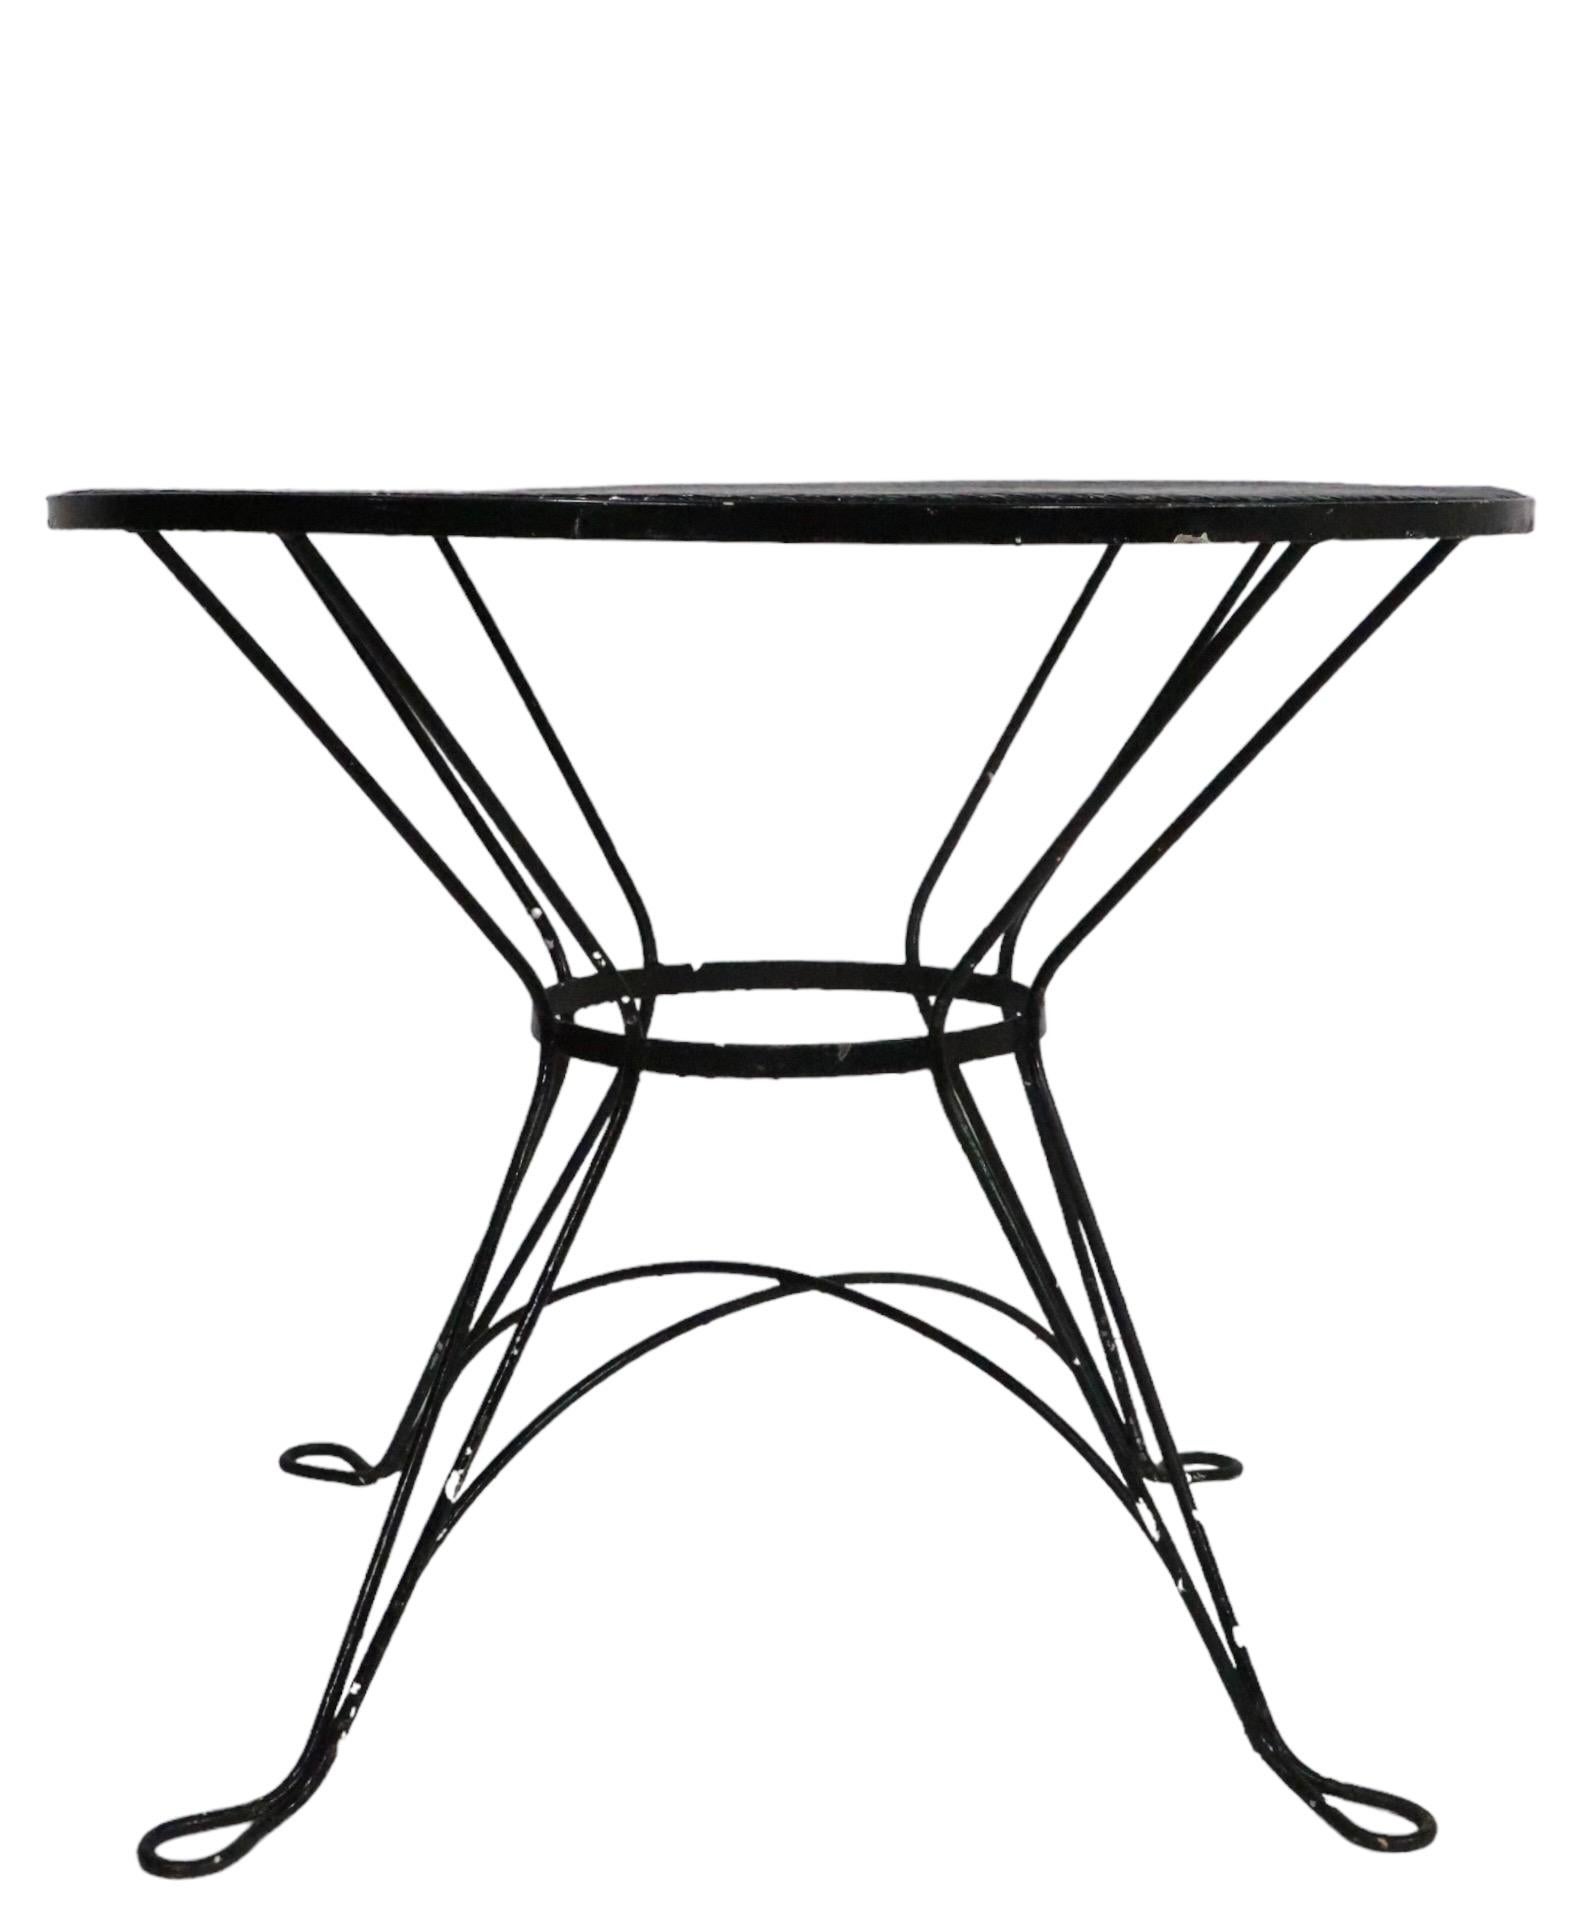 Wrought Iron  Vintage Outdoor Garden Patio Poolside Dining Cafe Table att. to Woodard  For Sale